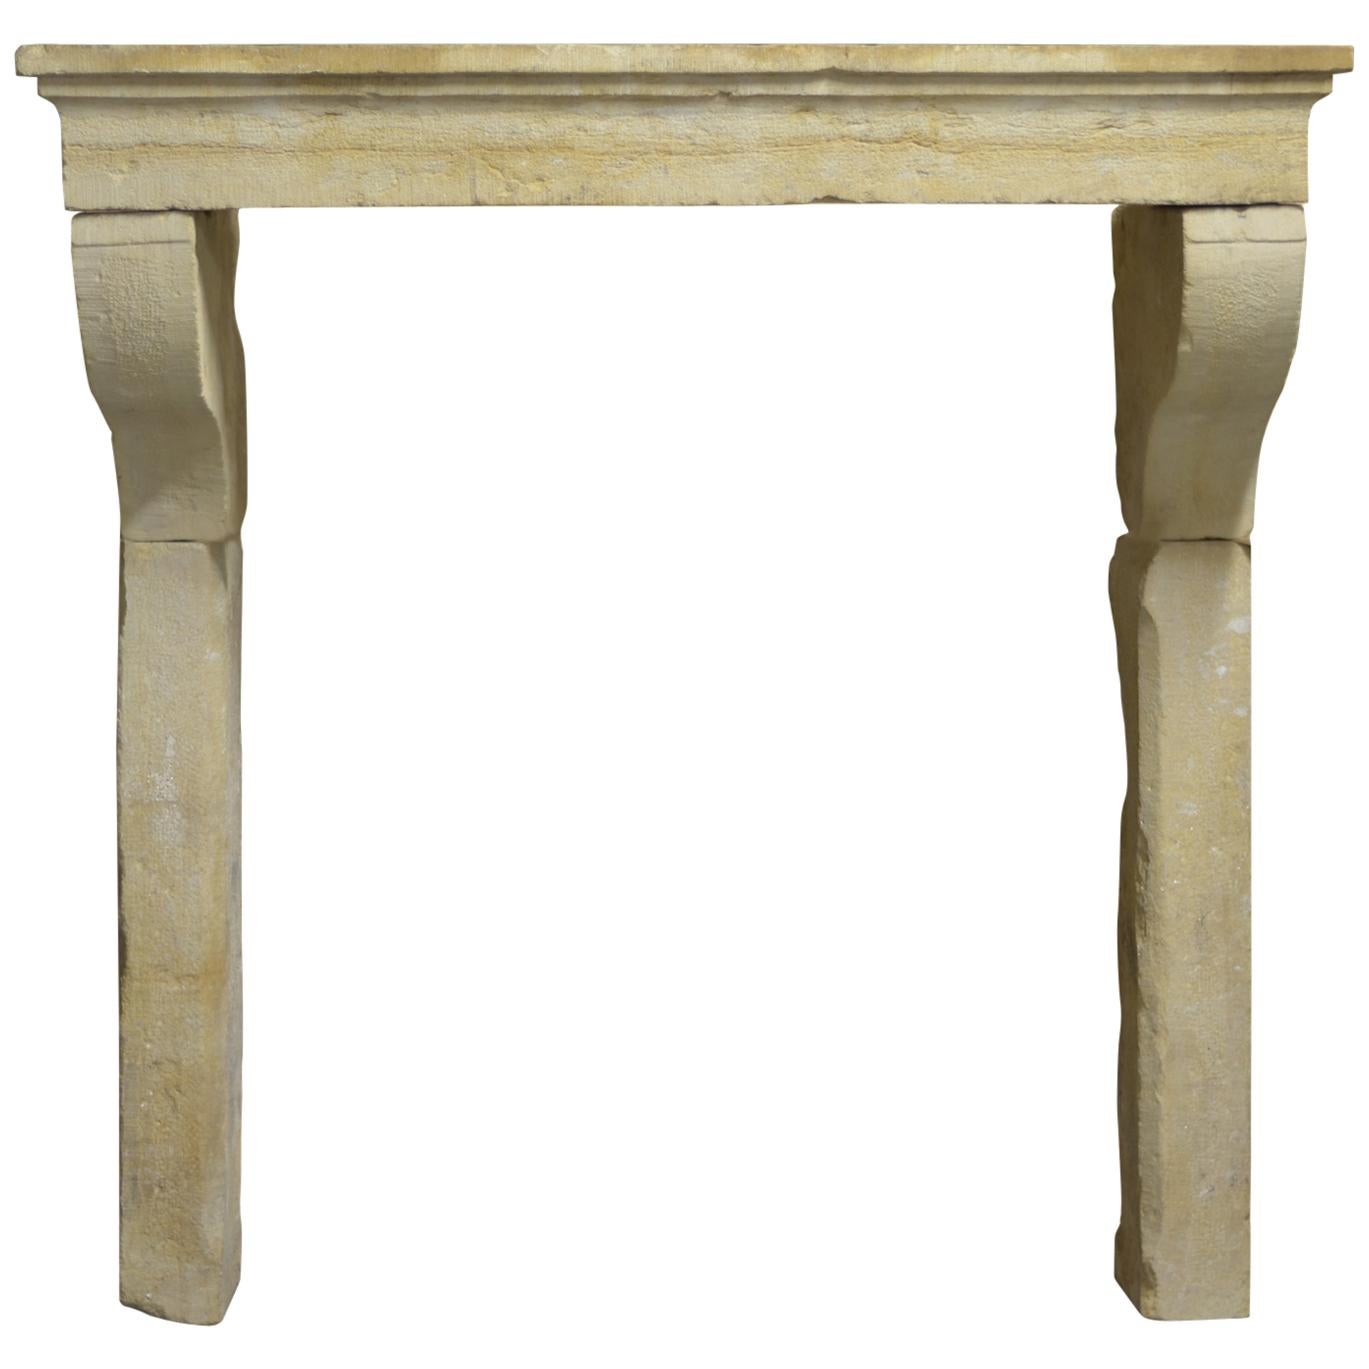 Tall Antique French Fireplace Mantel